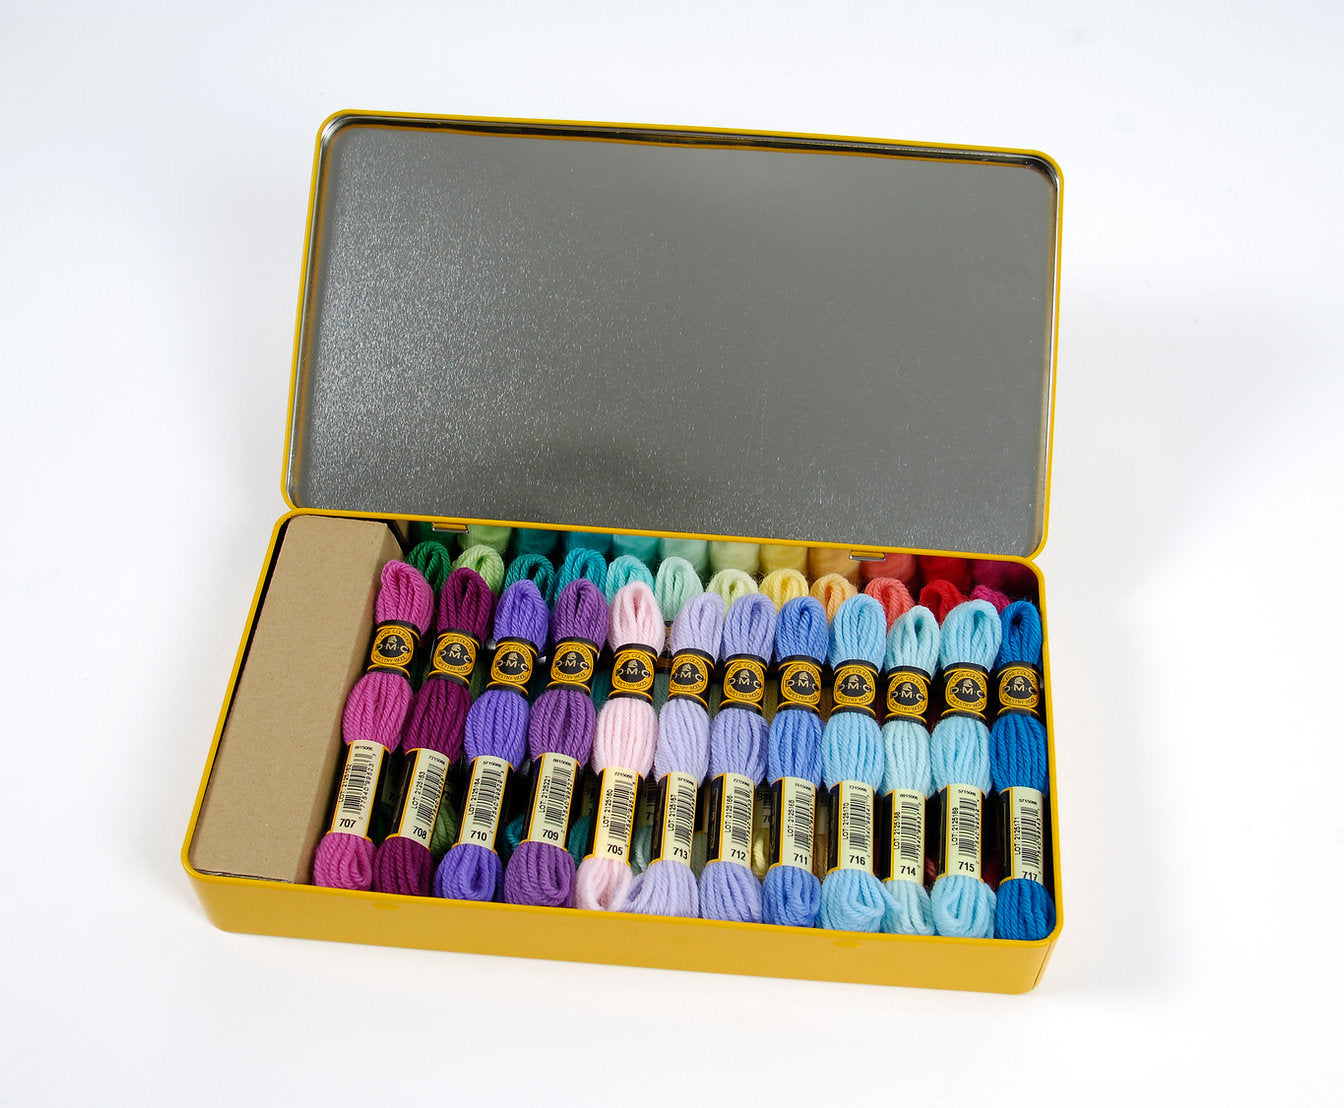 Metallic Box with 24 Skeins of DMC Colbert Wool - Limited Edition for embroidery and upholstery